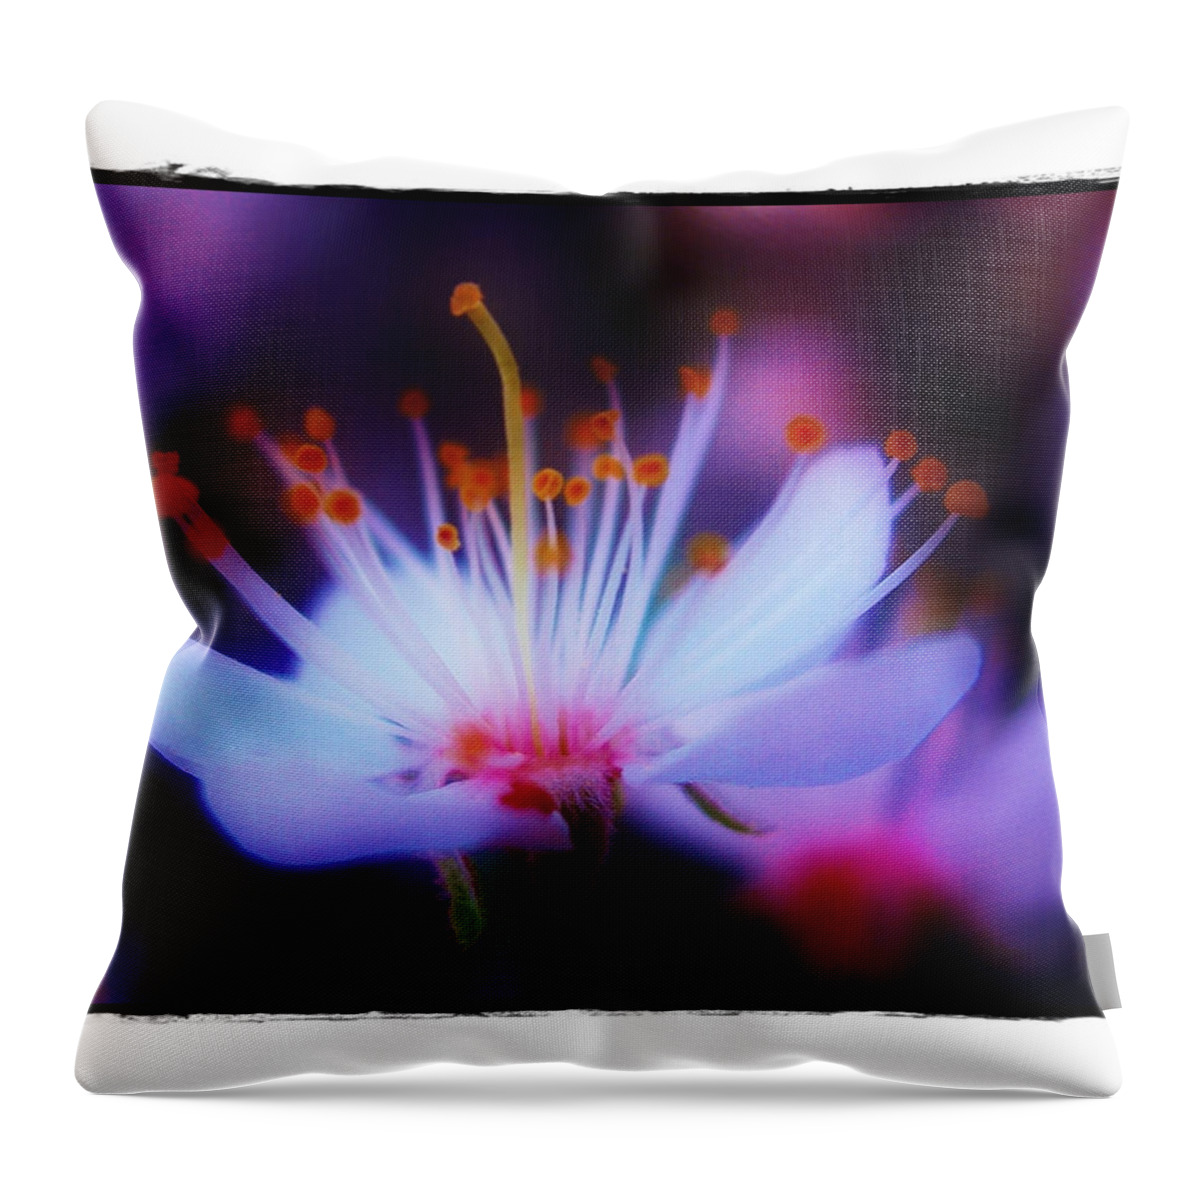 Dreamy Throw Pillow featuring the photograph Bradford Ballet by Judi Bagwell